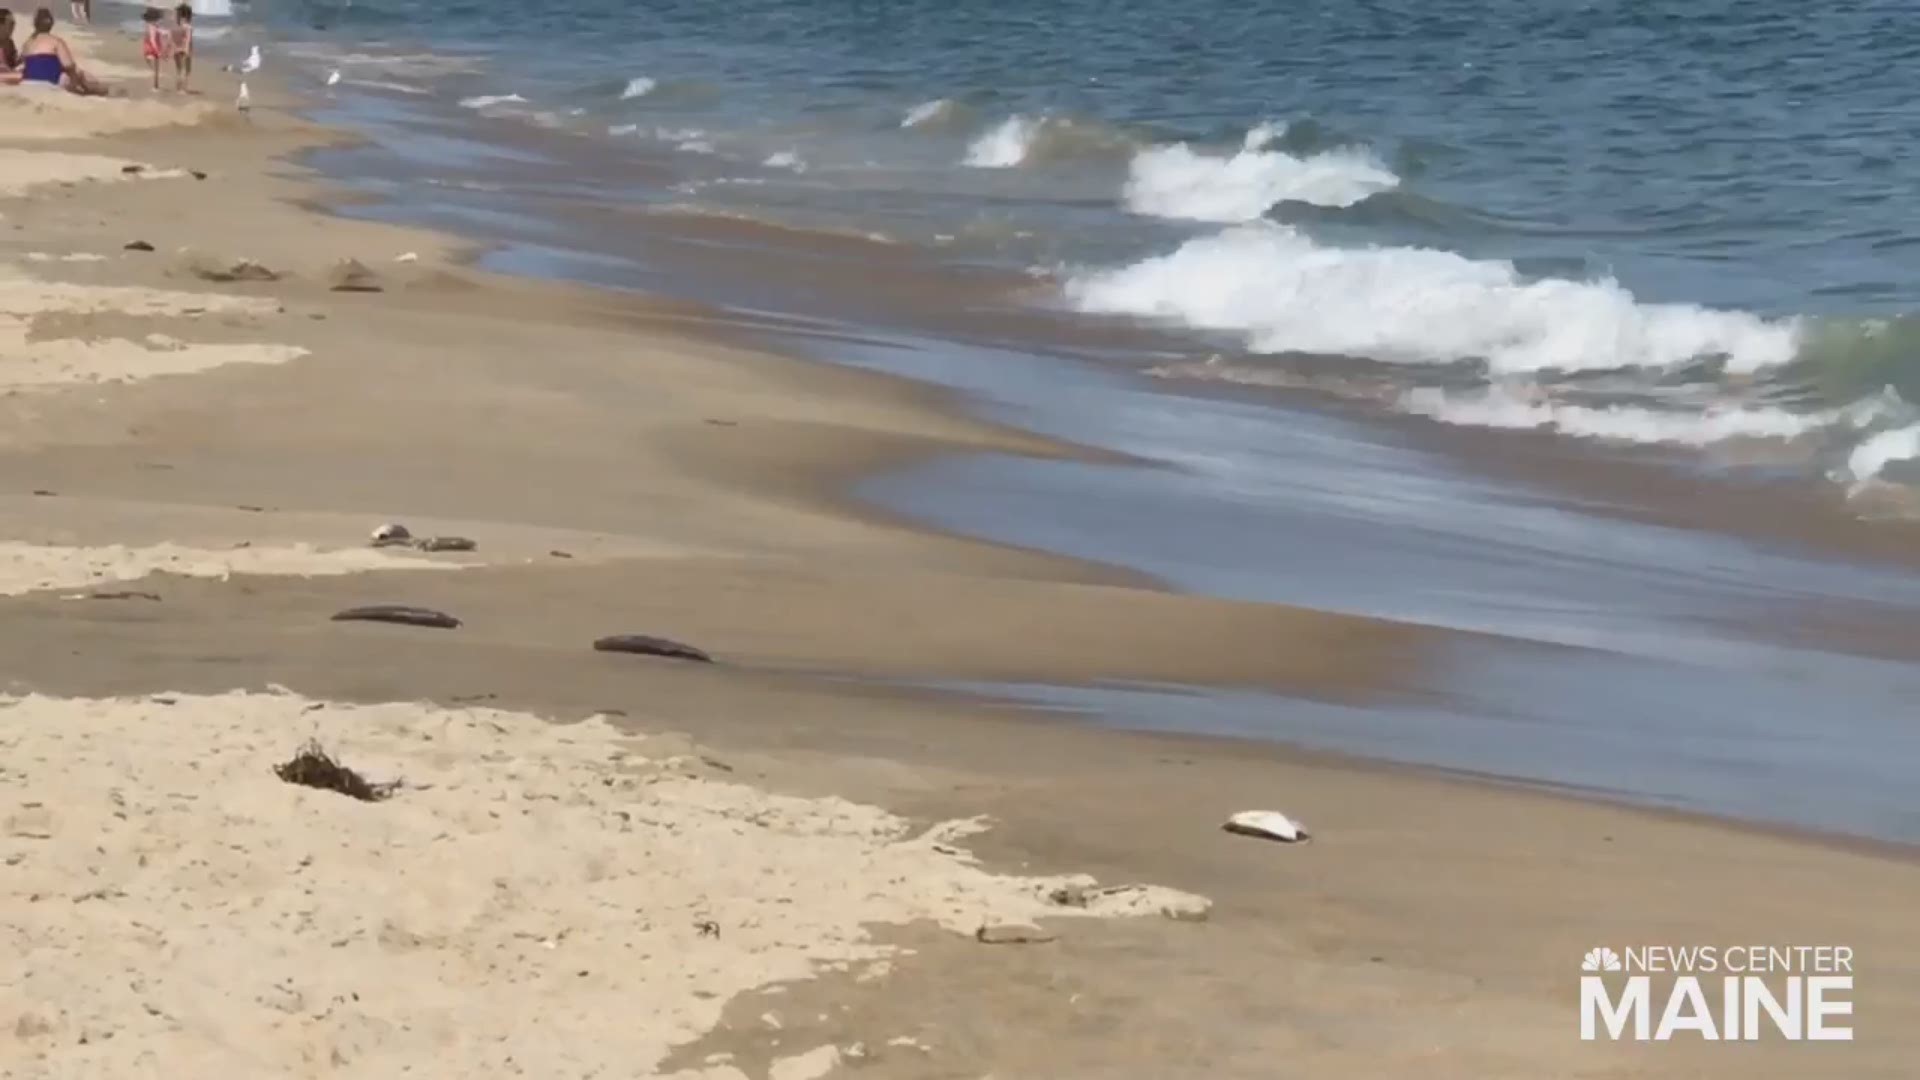 According to OOB officials, hundreds of dead fish washed ashore Friday